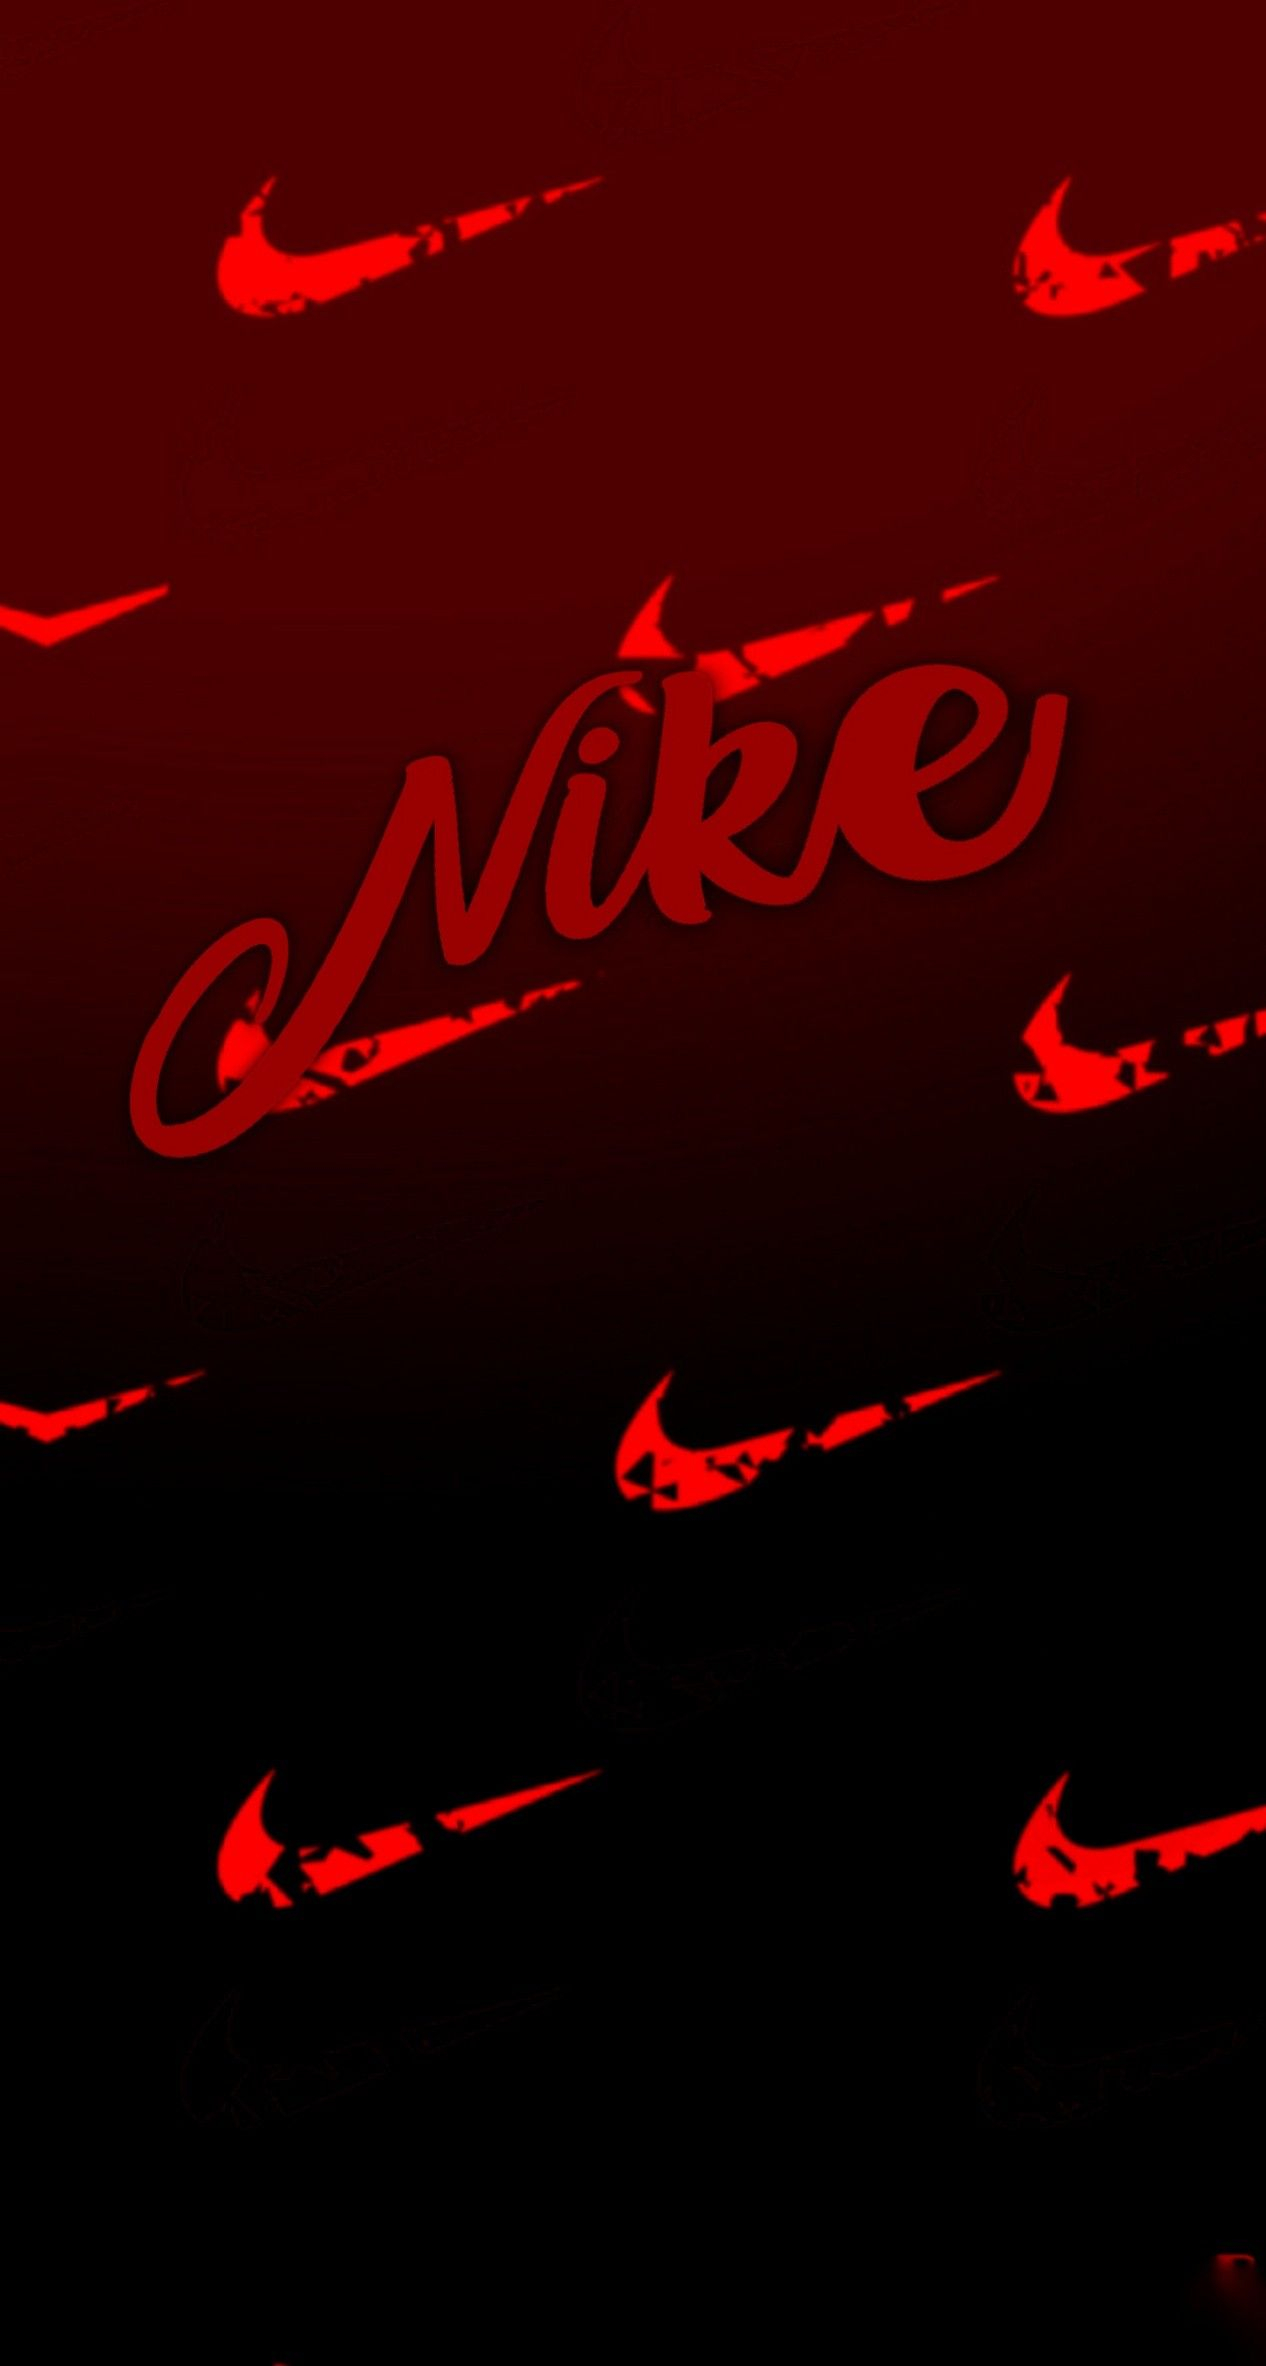 1266x2366 Pin by Hooter's Konceptz on Nike wallpaper | Nike wallpaper, Iphone wallpaper vintage, Nike logo wallpapers